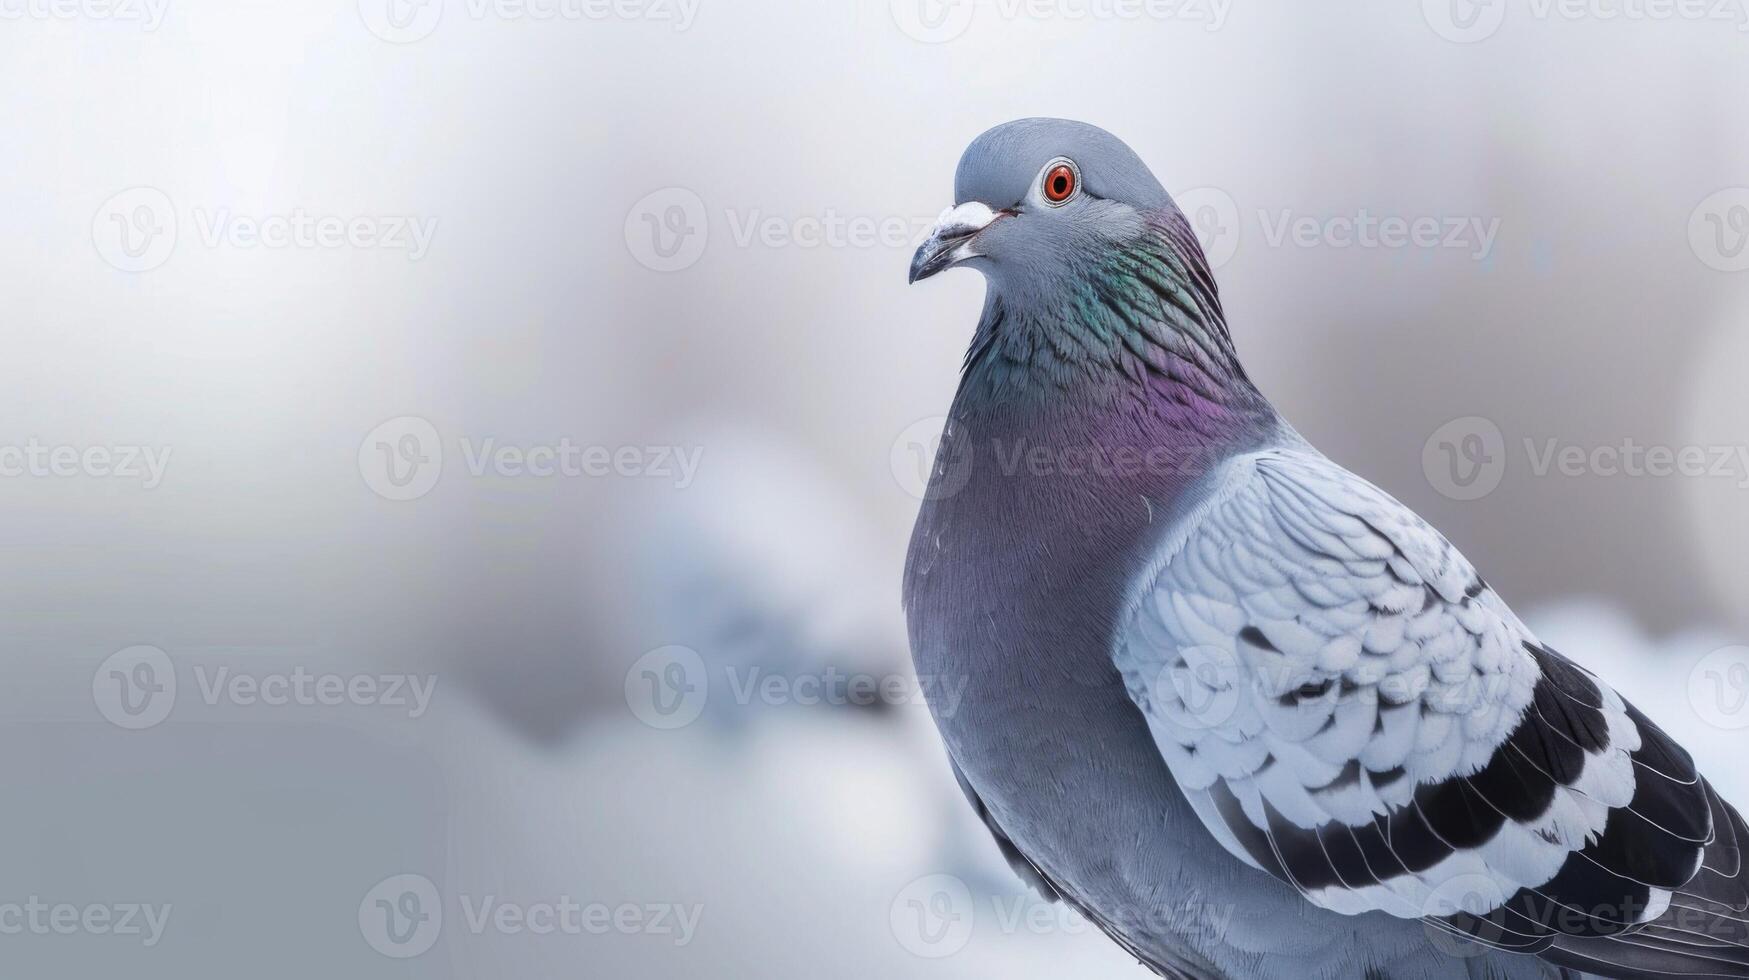 Close-up portrait of a pigeon featuring its feathers beak eye and wildlife presence in nature photo